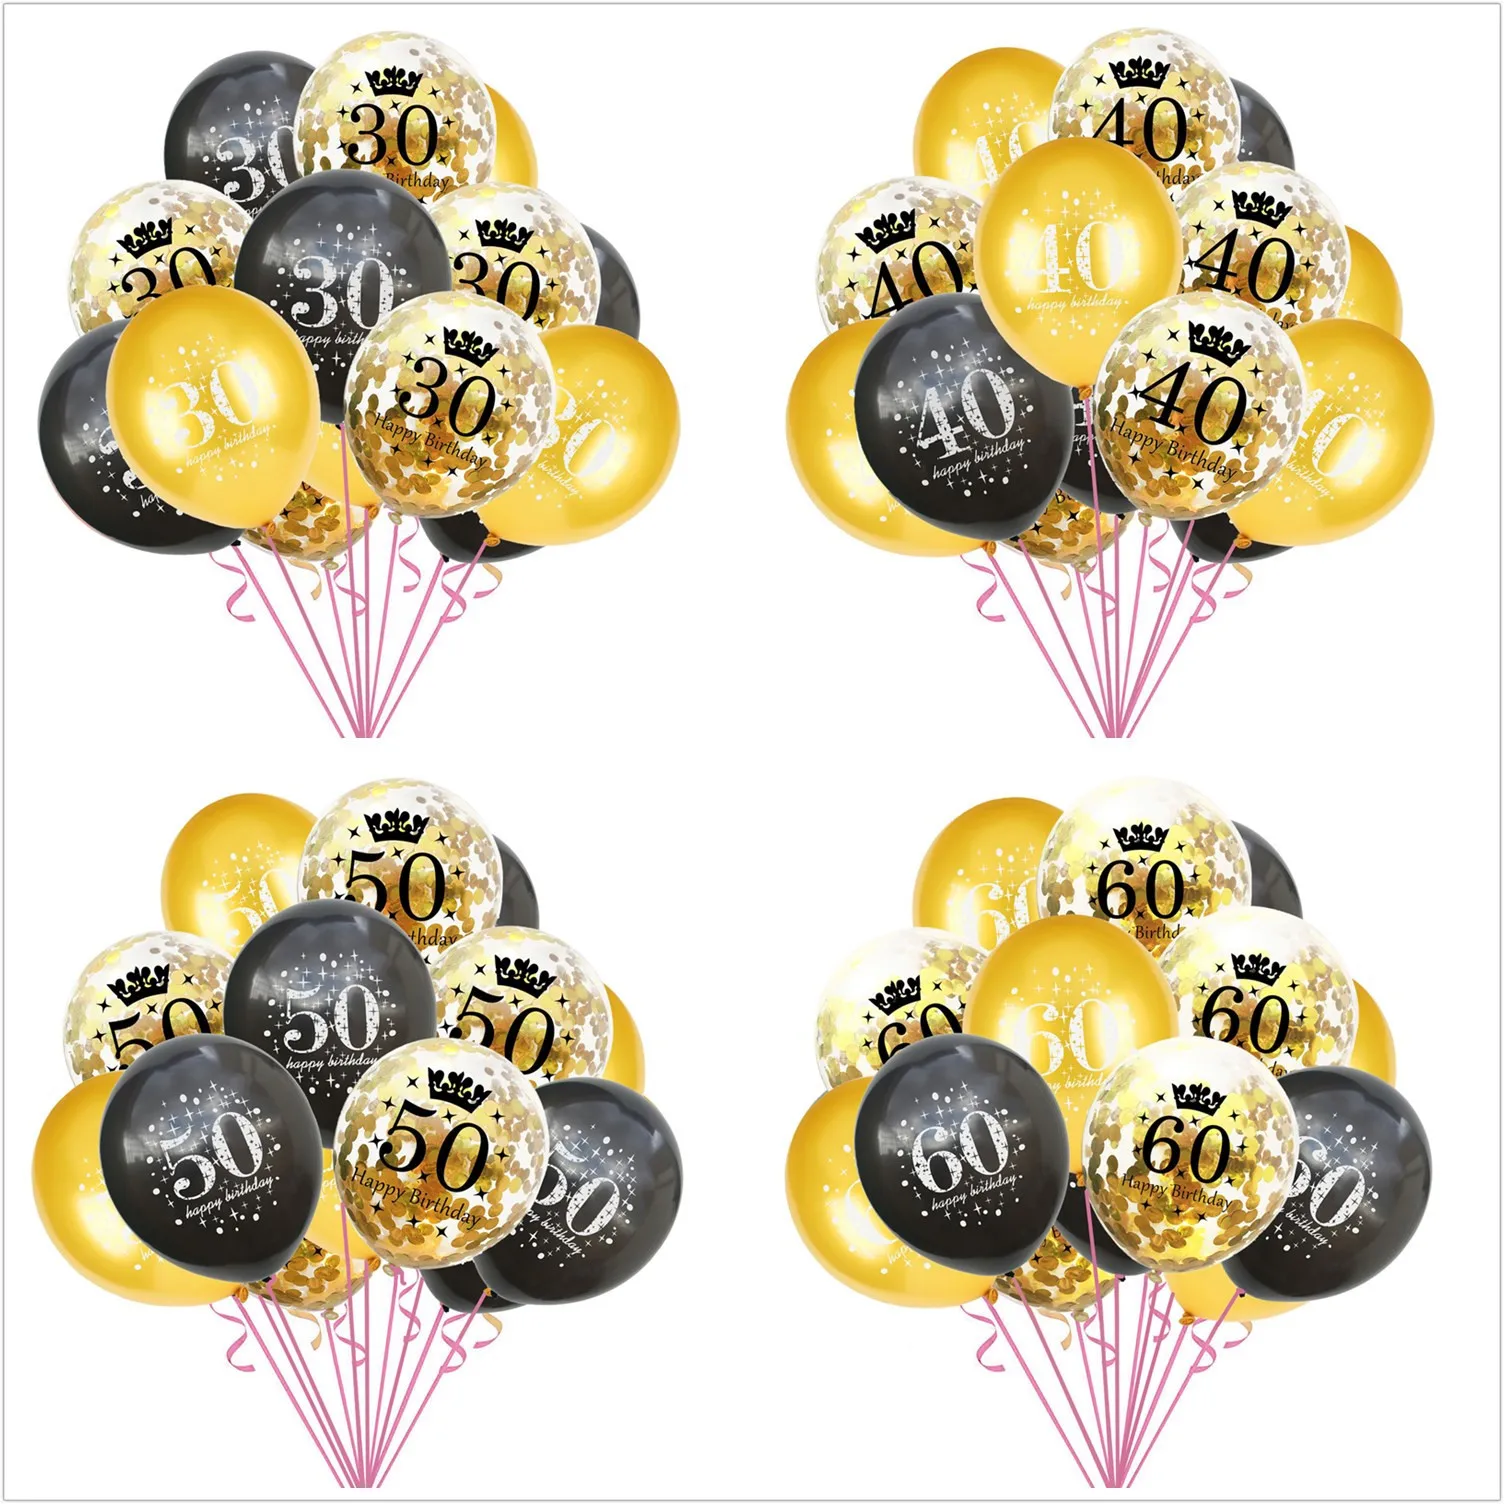 15pcs 12 inch 16 18 30 40 50 60  Year Old Confetti Sequins Combination Balloon Set Adult Birthday Party Decorations